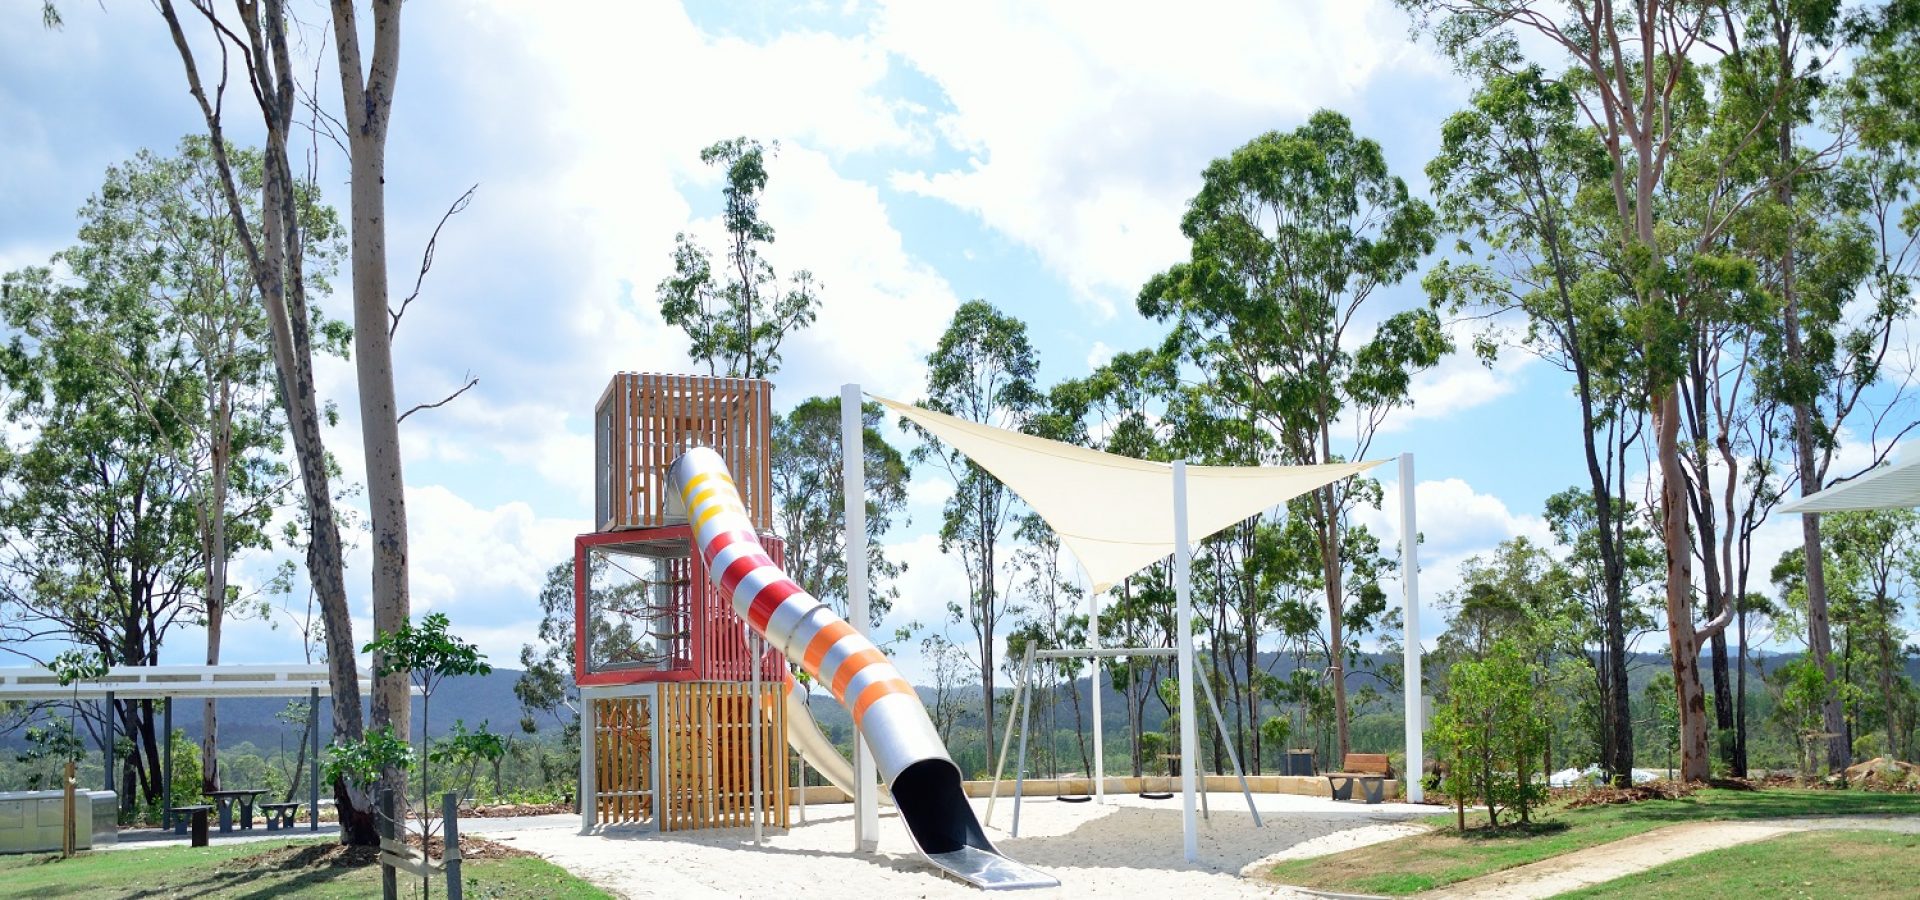 Playground tower with stainless steel slide